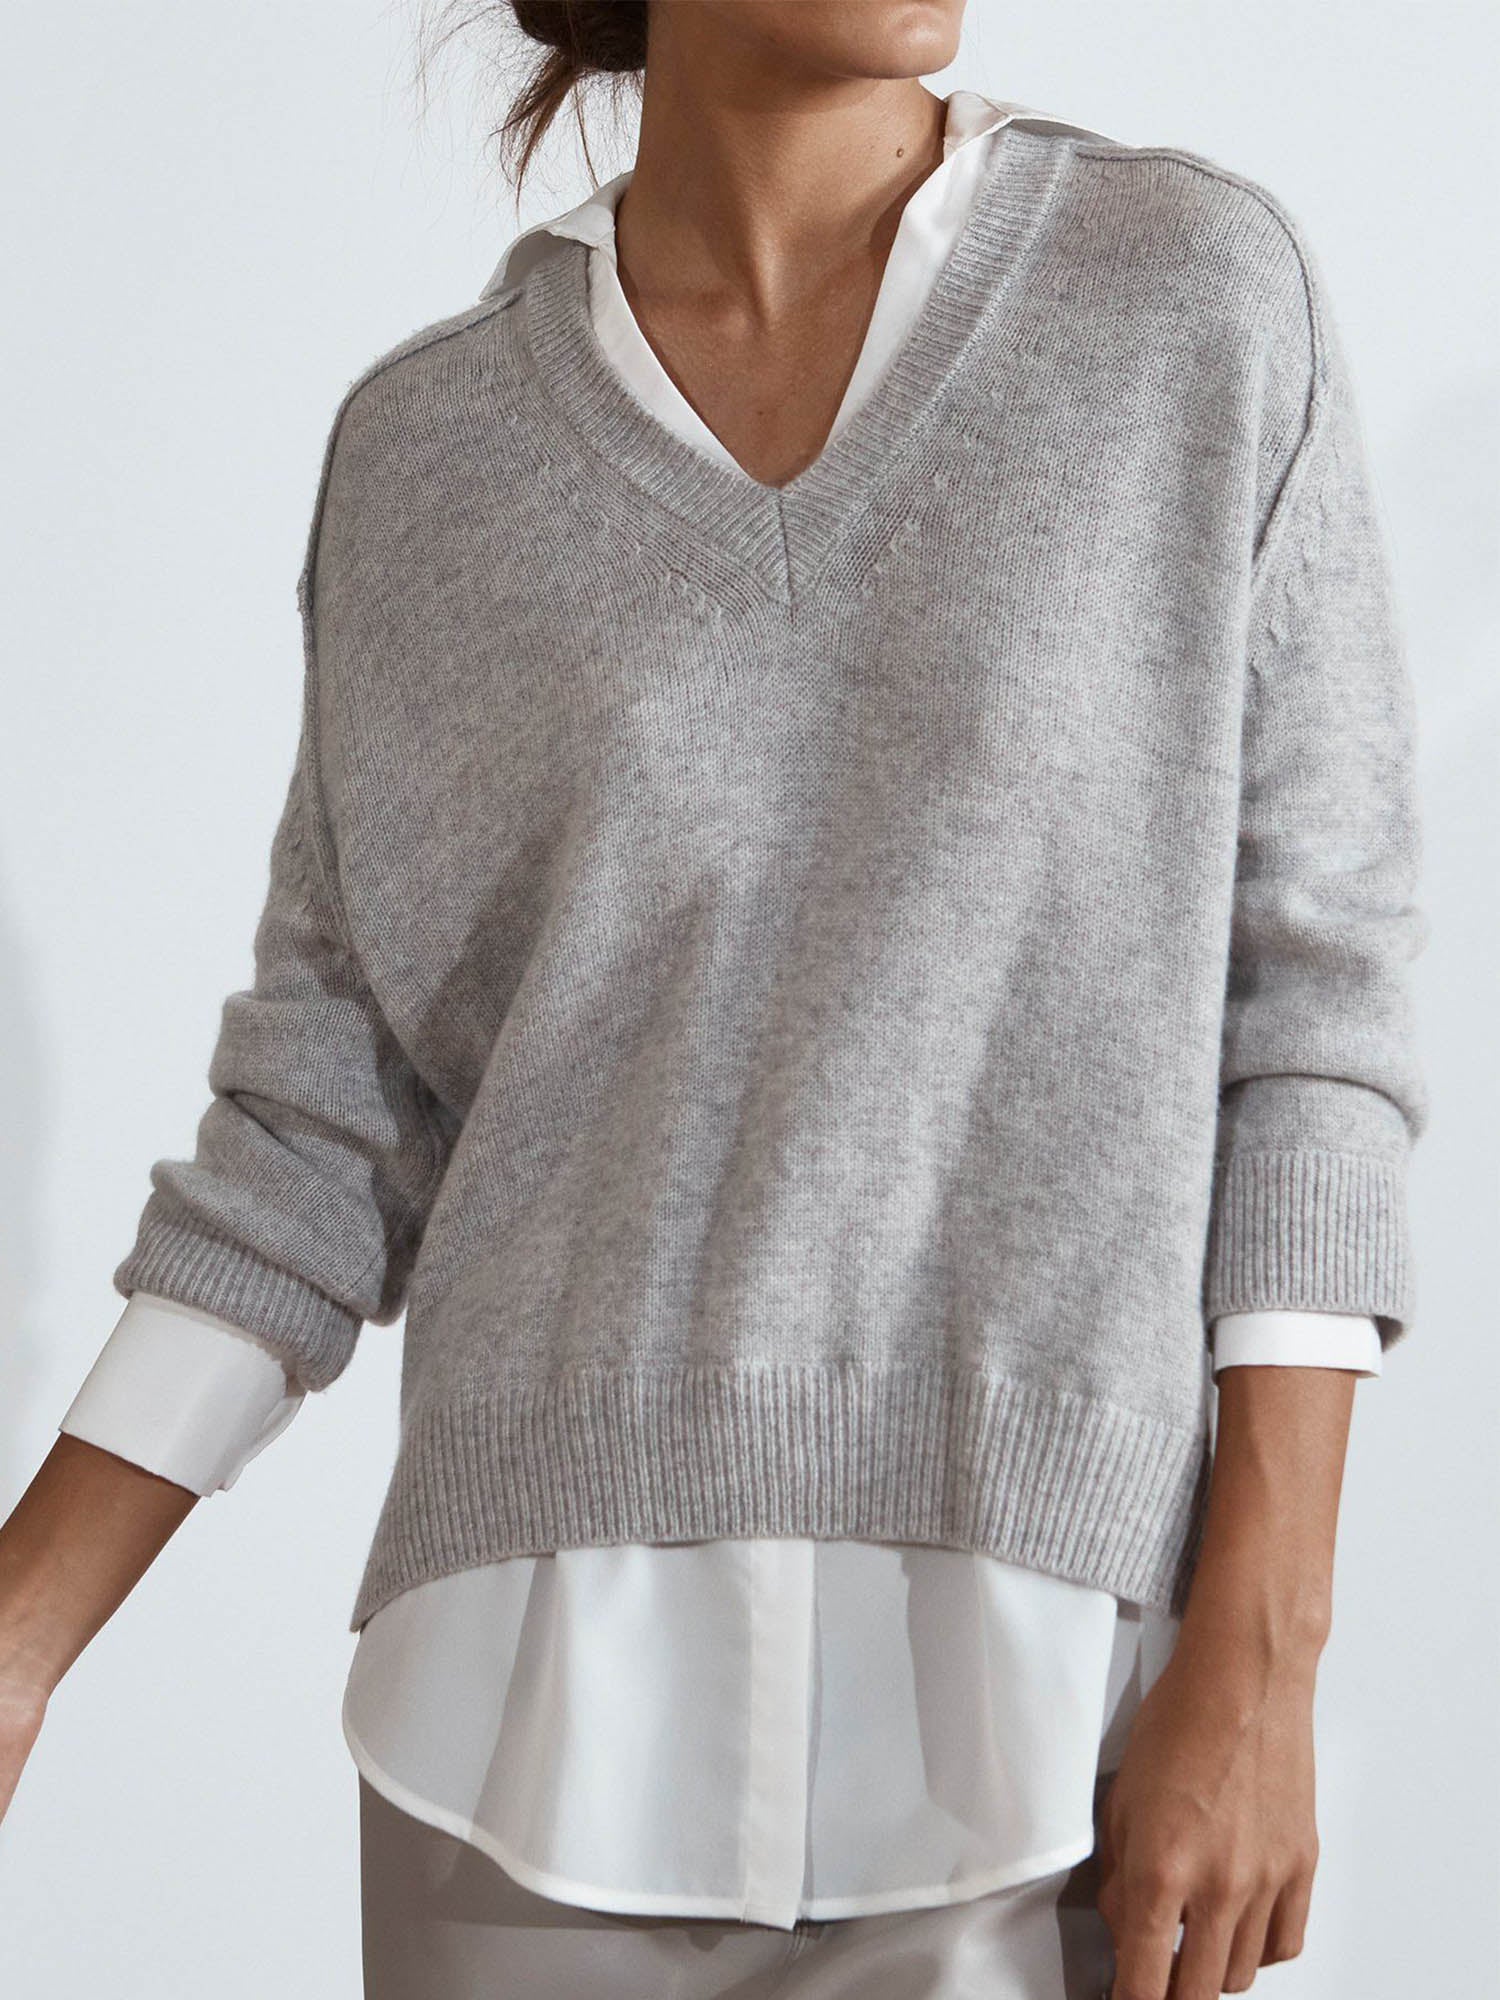 Looker ligth light grey layered v-neck sweater front view